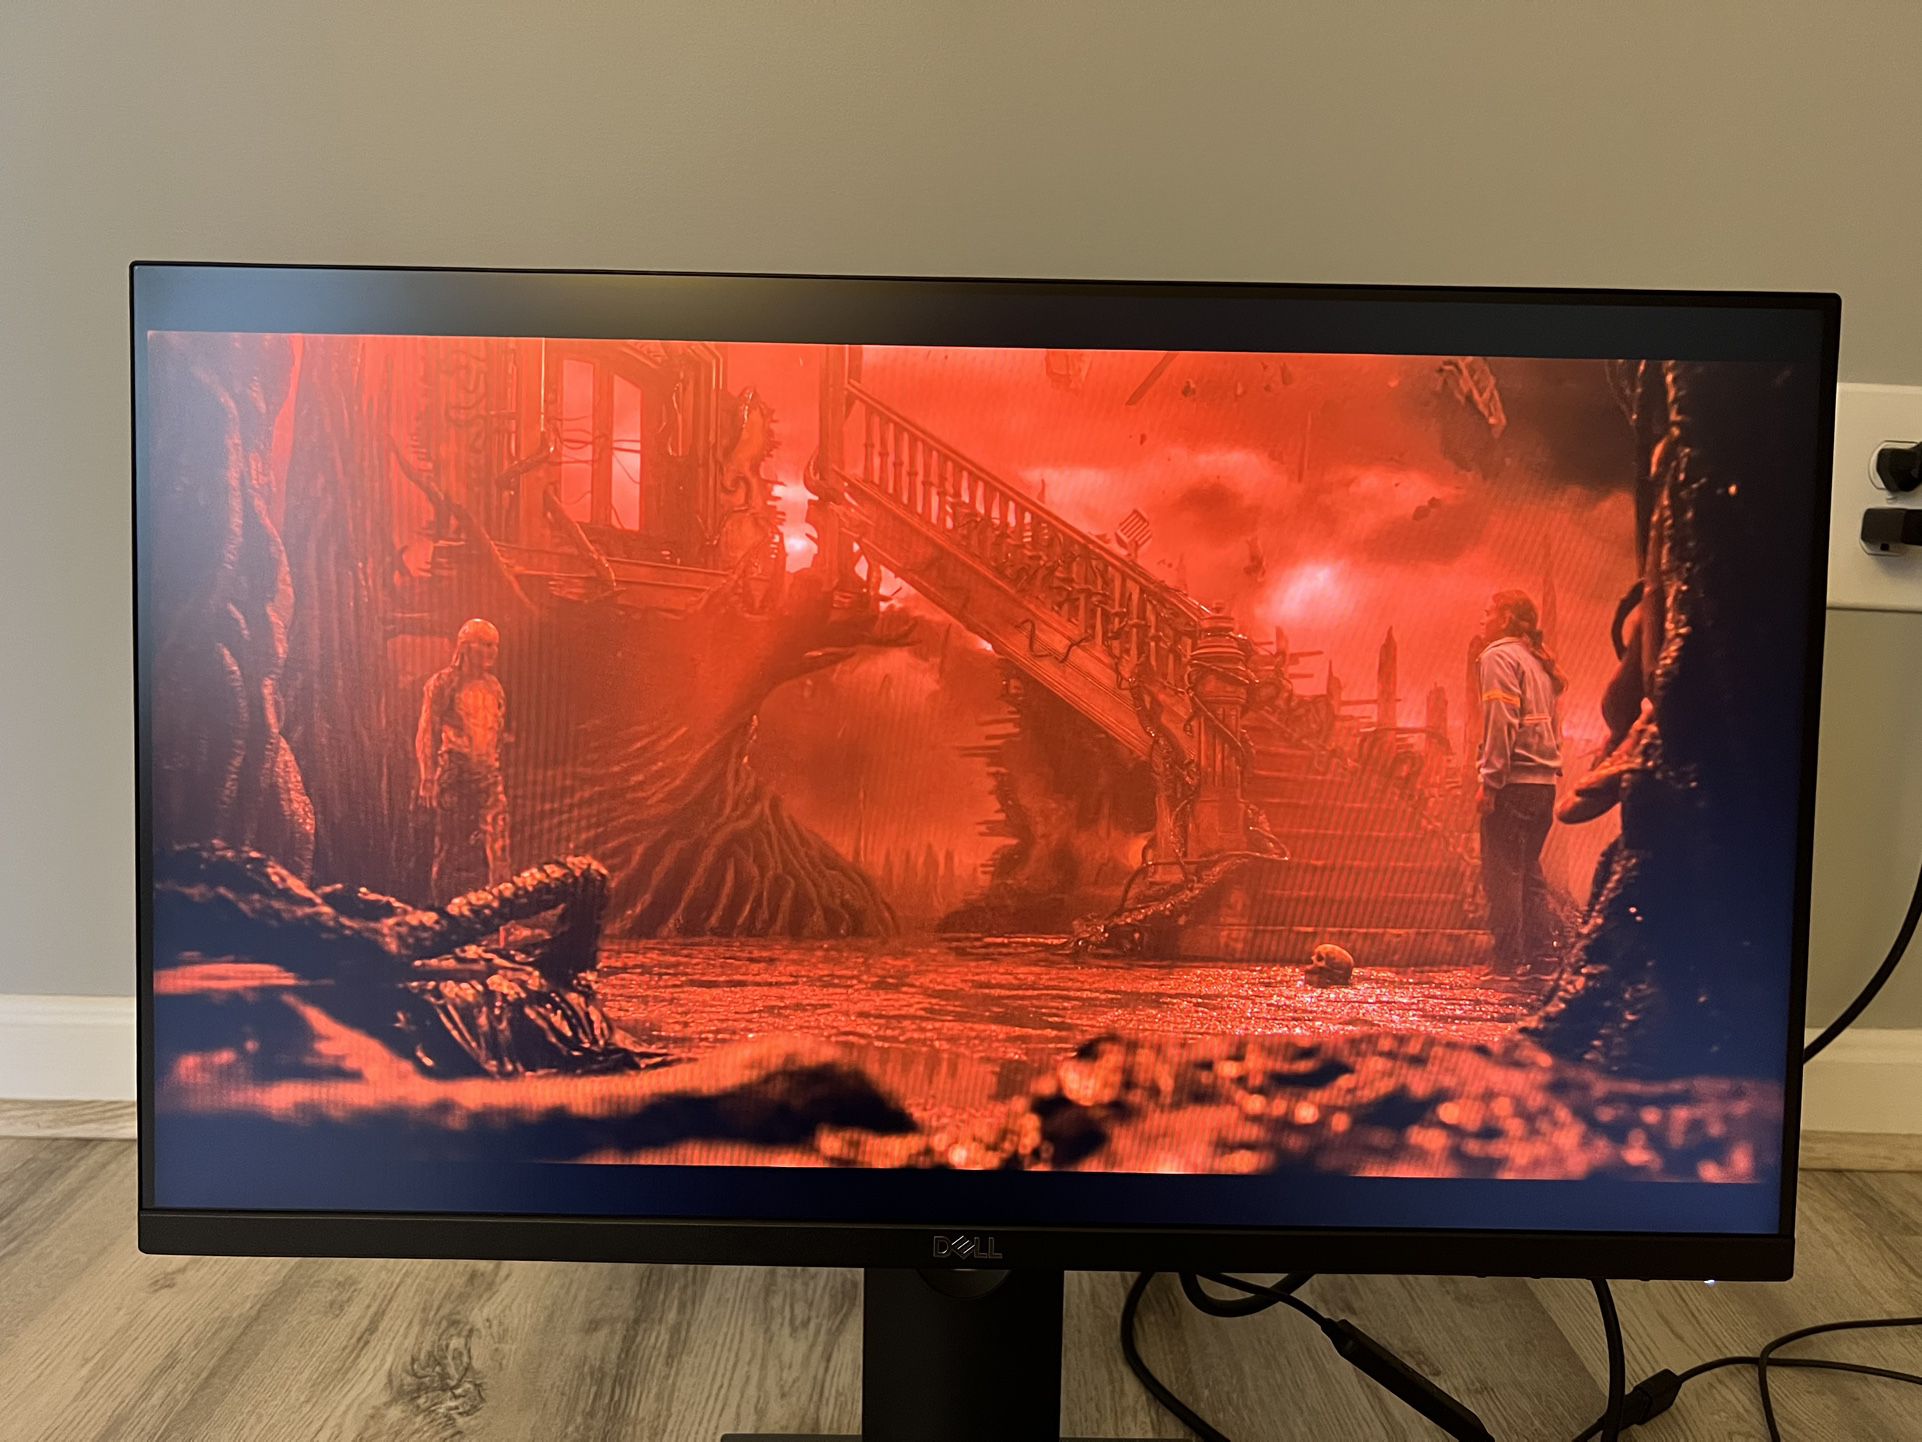 Dell P2419H 24 Inch LED-Backlit, Anti-Glare, 3H Hard Coating IPS Monitor - (8 ms Response, FHD 1920 x 1080 at 60Hz, 1000:1 Contrast, with ComfortView 